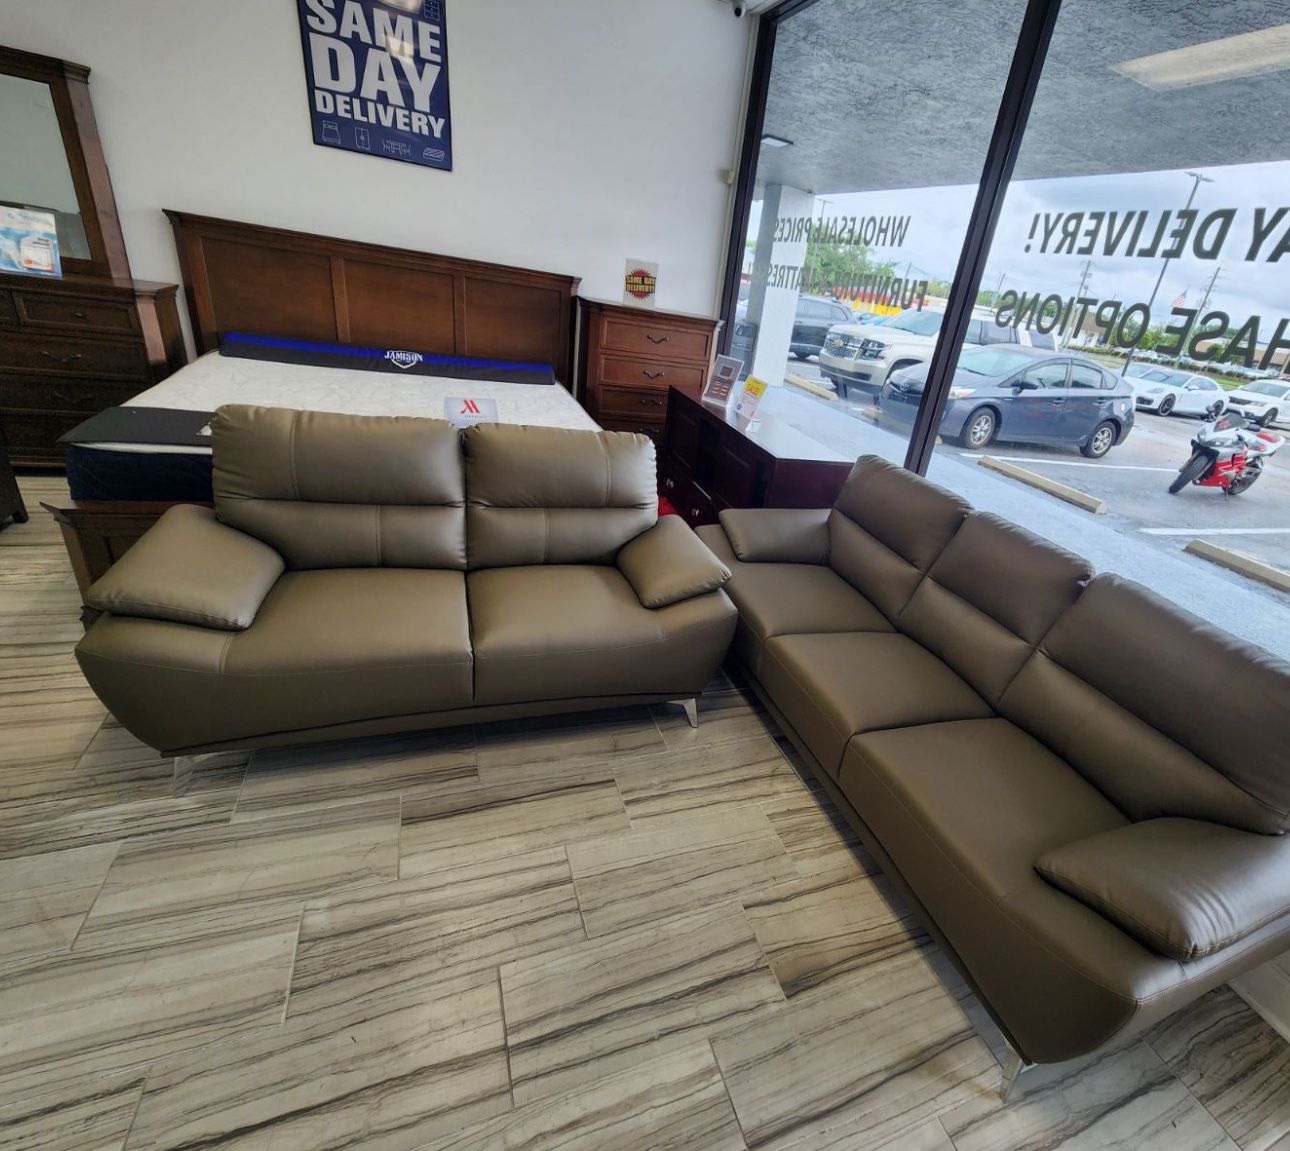 MEMORIAL DAY SALE!! COMFY NEW VALENCIA AND LOVESEAT SET ON SALE ONLY $699. IN STOCK SAME DAY DELIVERY 🚚 EASY FINANCING 